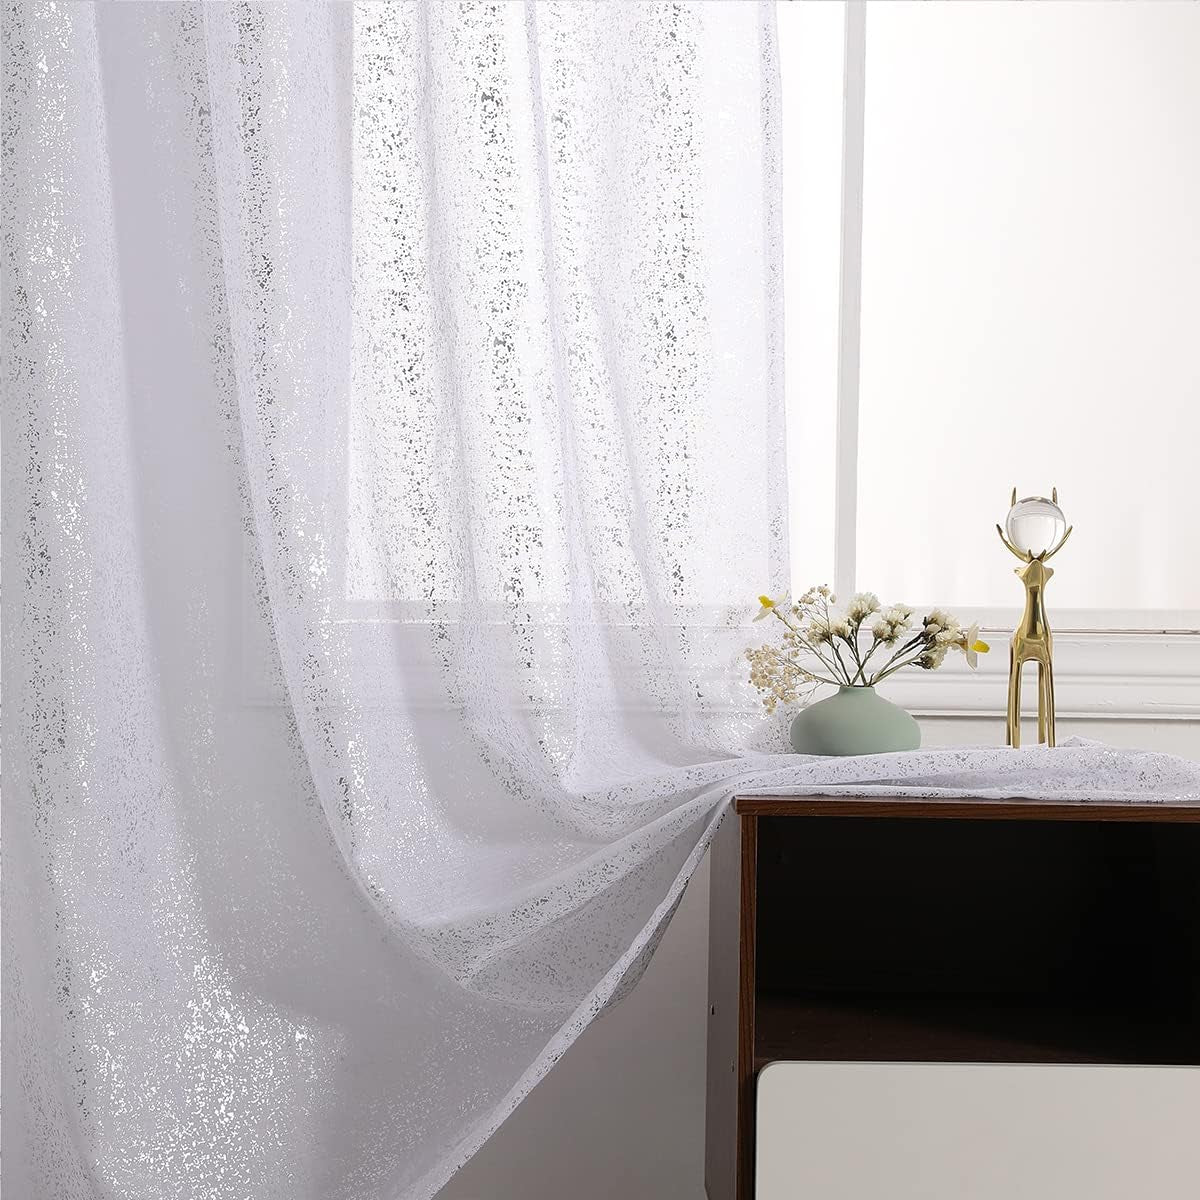 Silver Sheer Curtains 84 Inch Long - Chic Sparkle Curtains for Living Room, Rod Pocket Glitter Sheer Curtains for Windows Privacy Silver Grey Sheer Panels, 52 X 84 Inch, 2 Panels, Silver Gray  TERLYTEX White Silver W52 X L84 Inch|Pair 